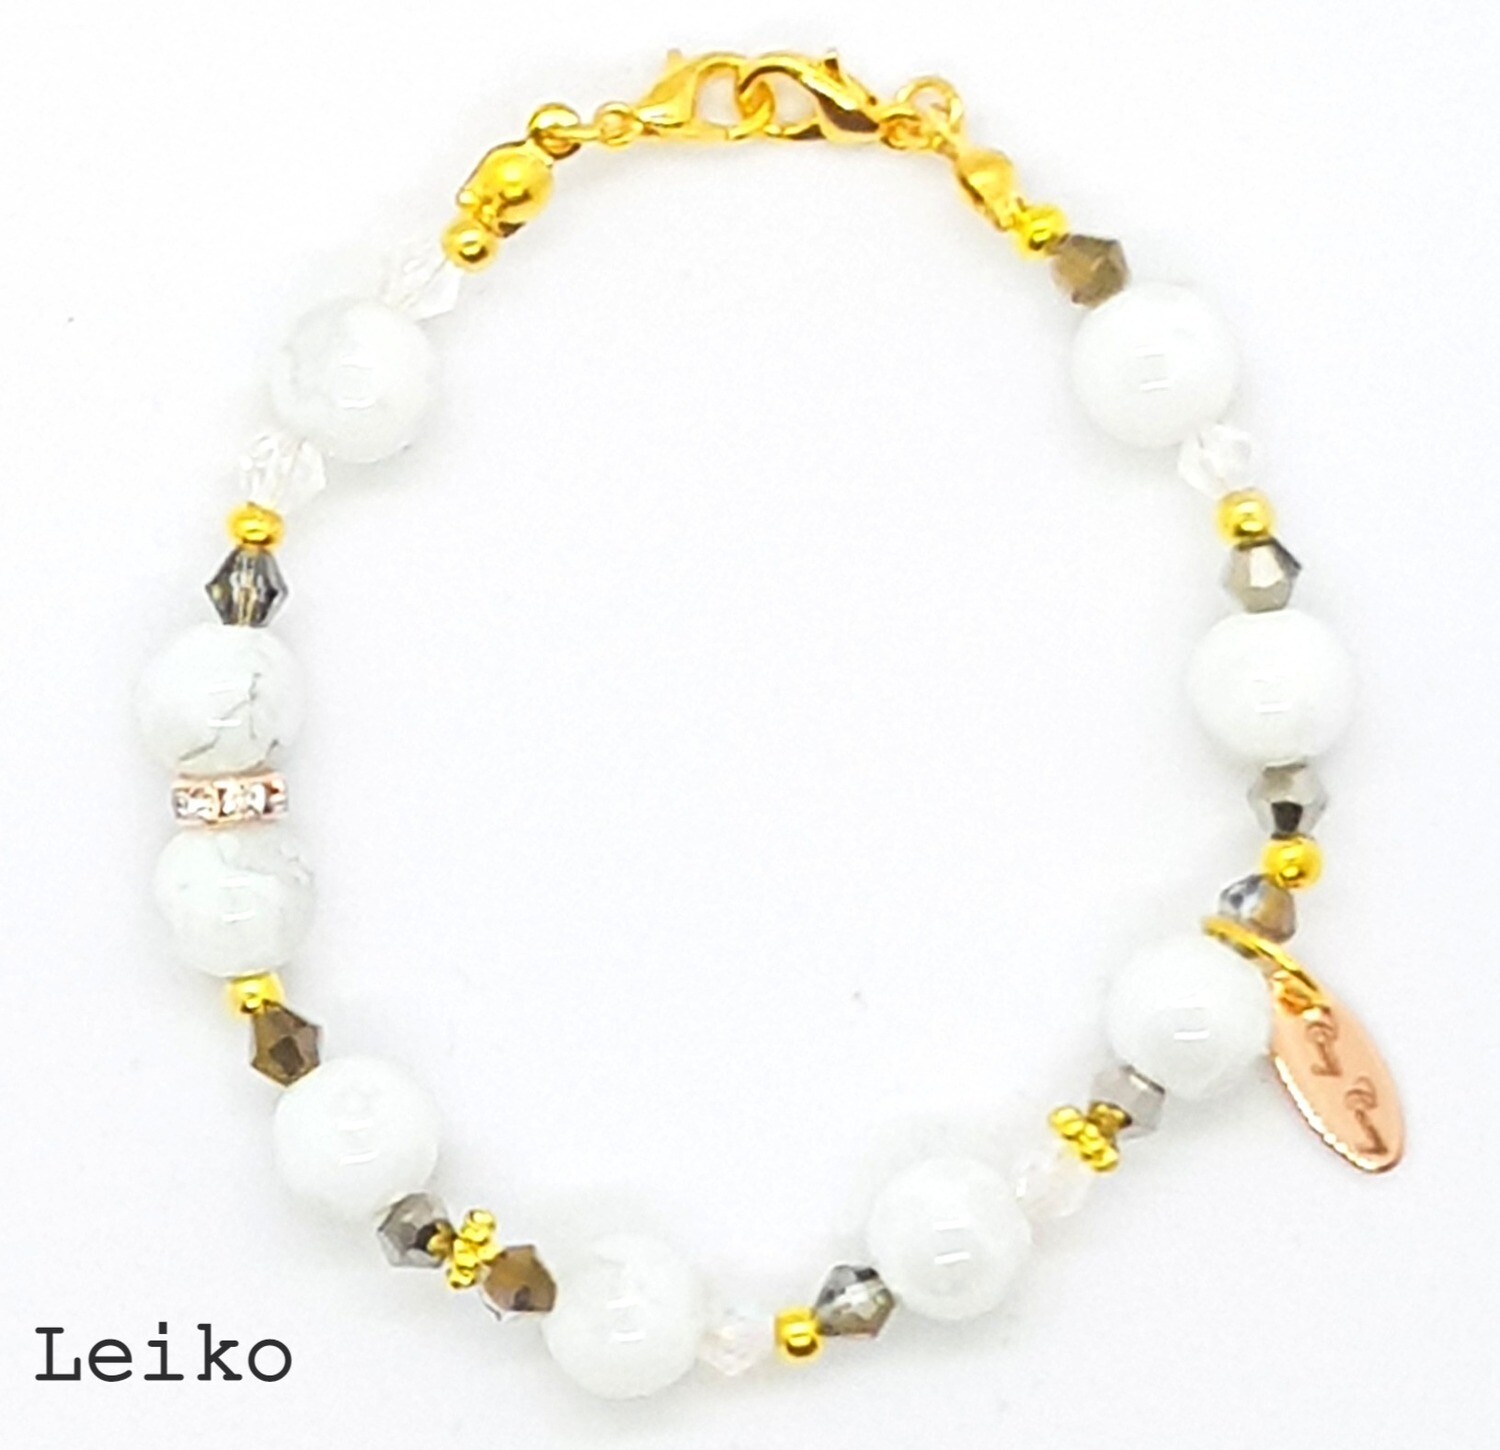 Bracelet & Face Mask Extender Dual Function (Leiko - White Pearl Beads, Czech Beads, Gold Accessories & Durable Soft Wire String)